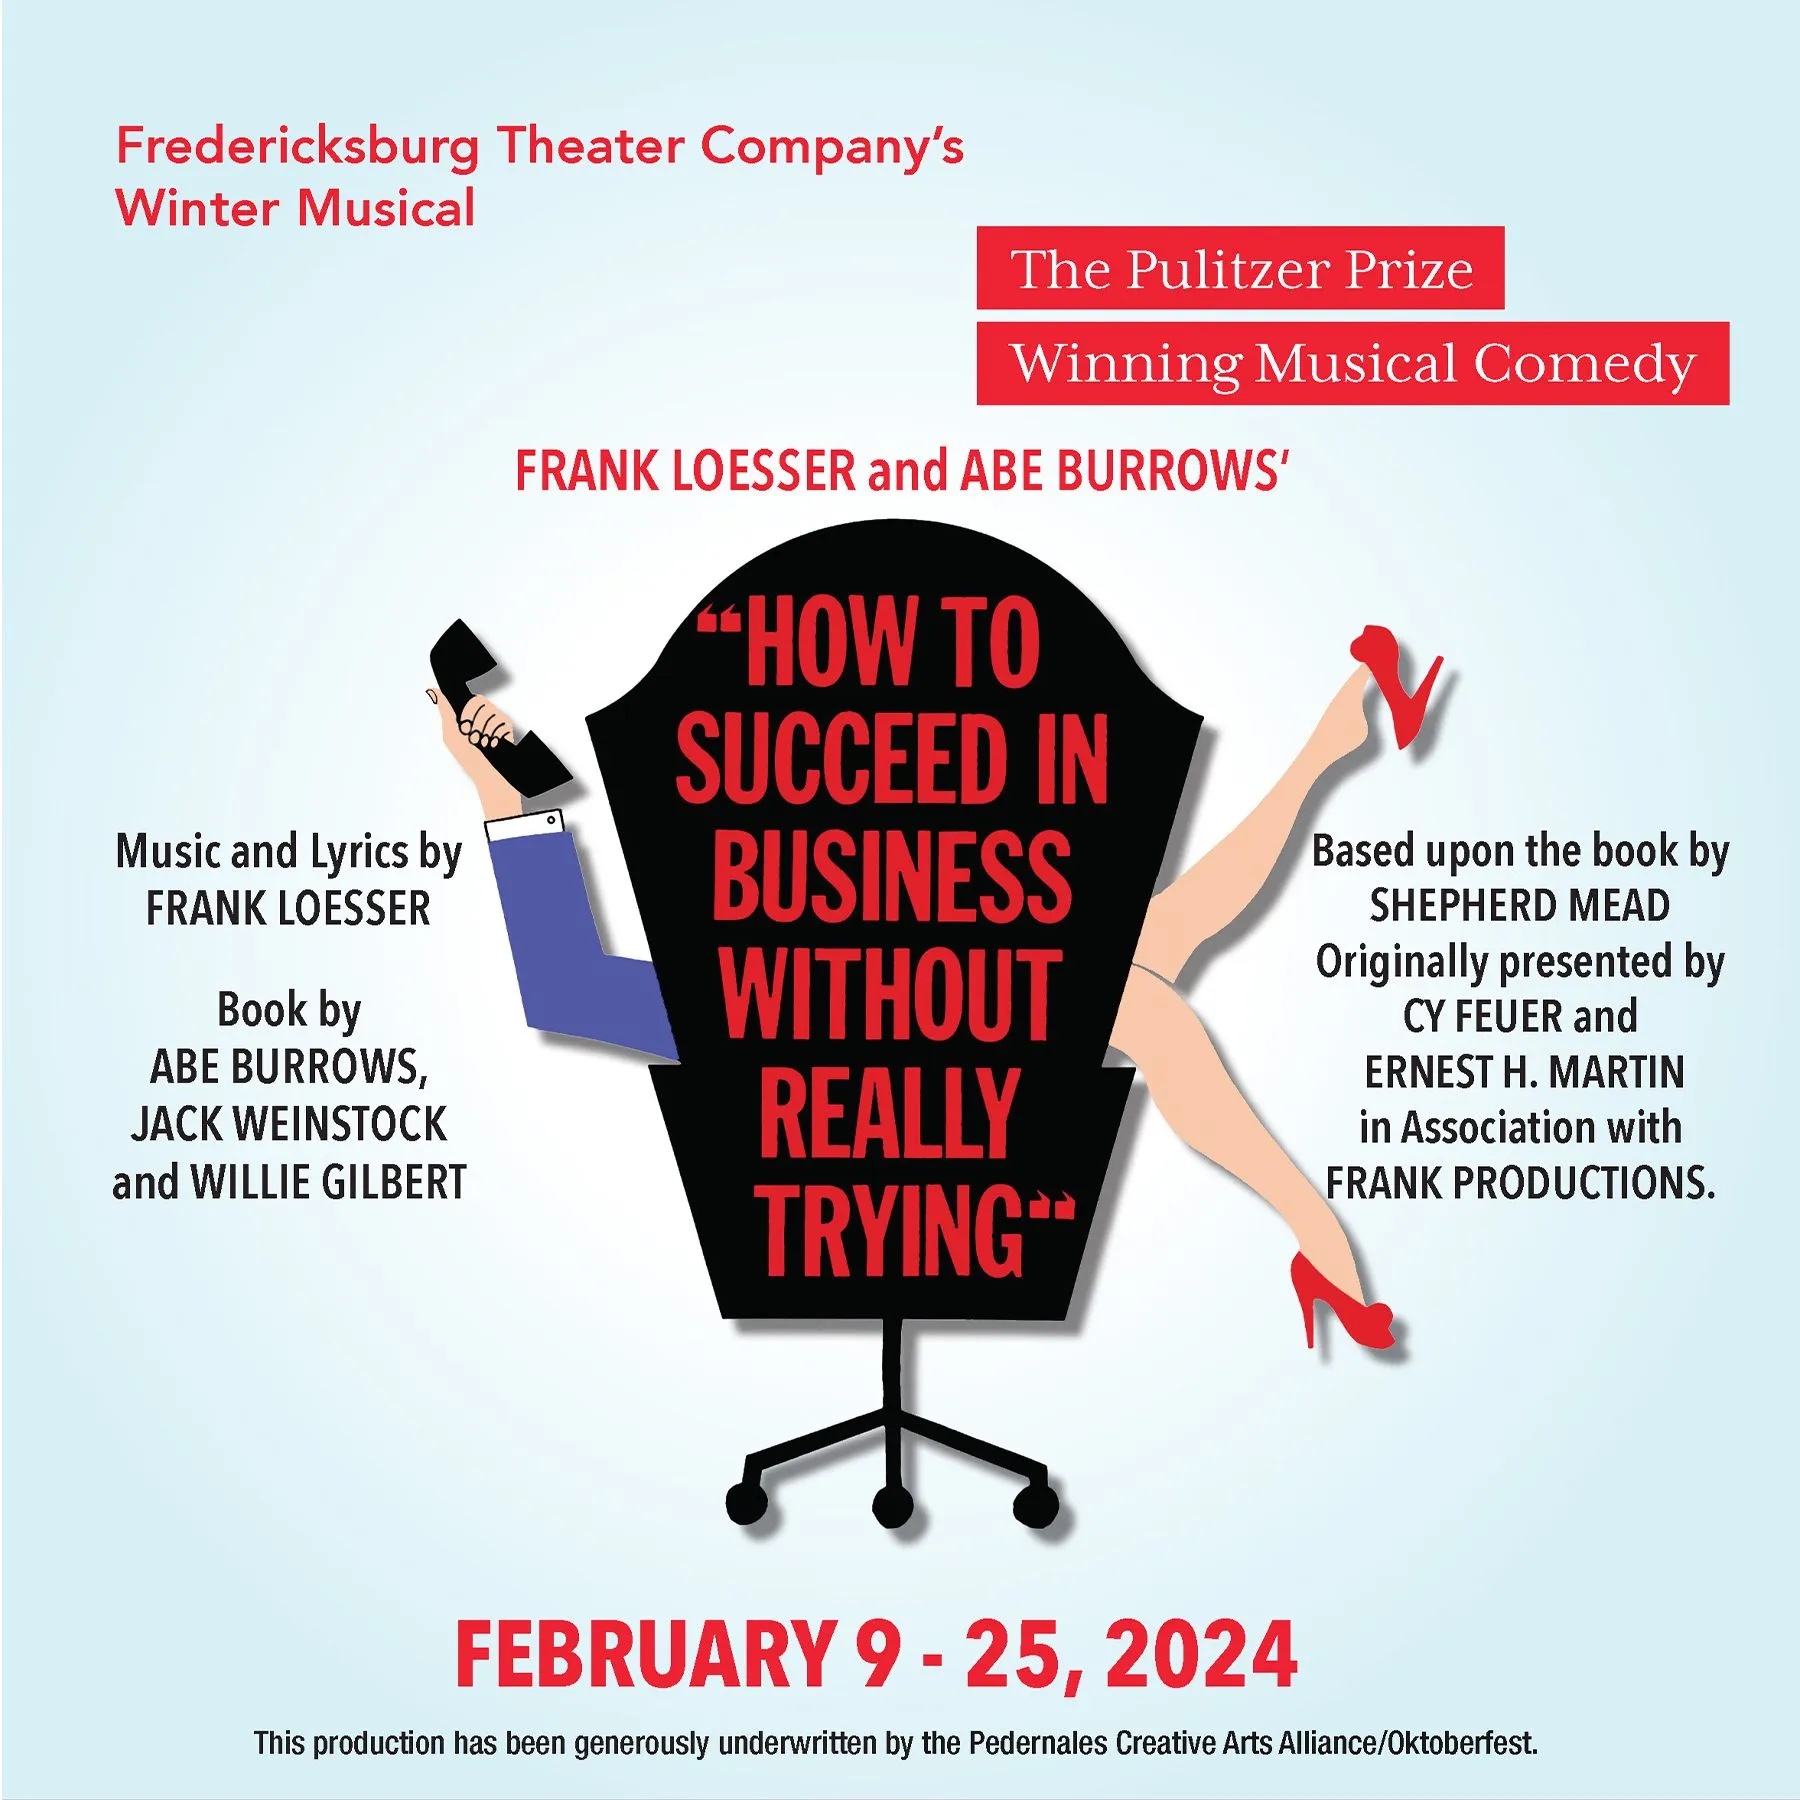 How to Succeed in Business Without Really Trying by Fredericksburg Theater Company (FTC)